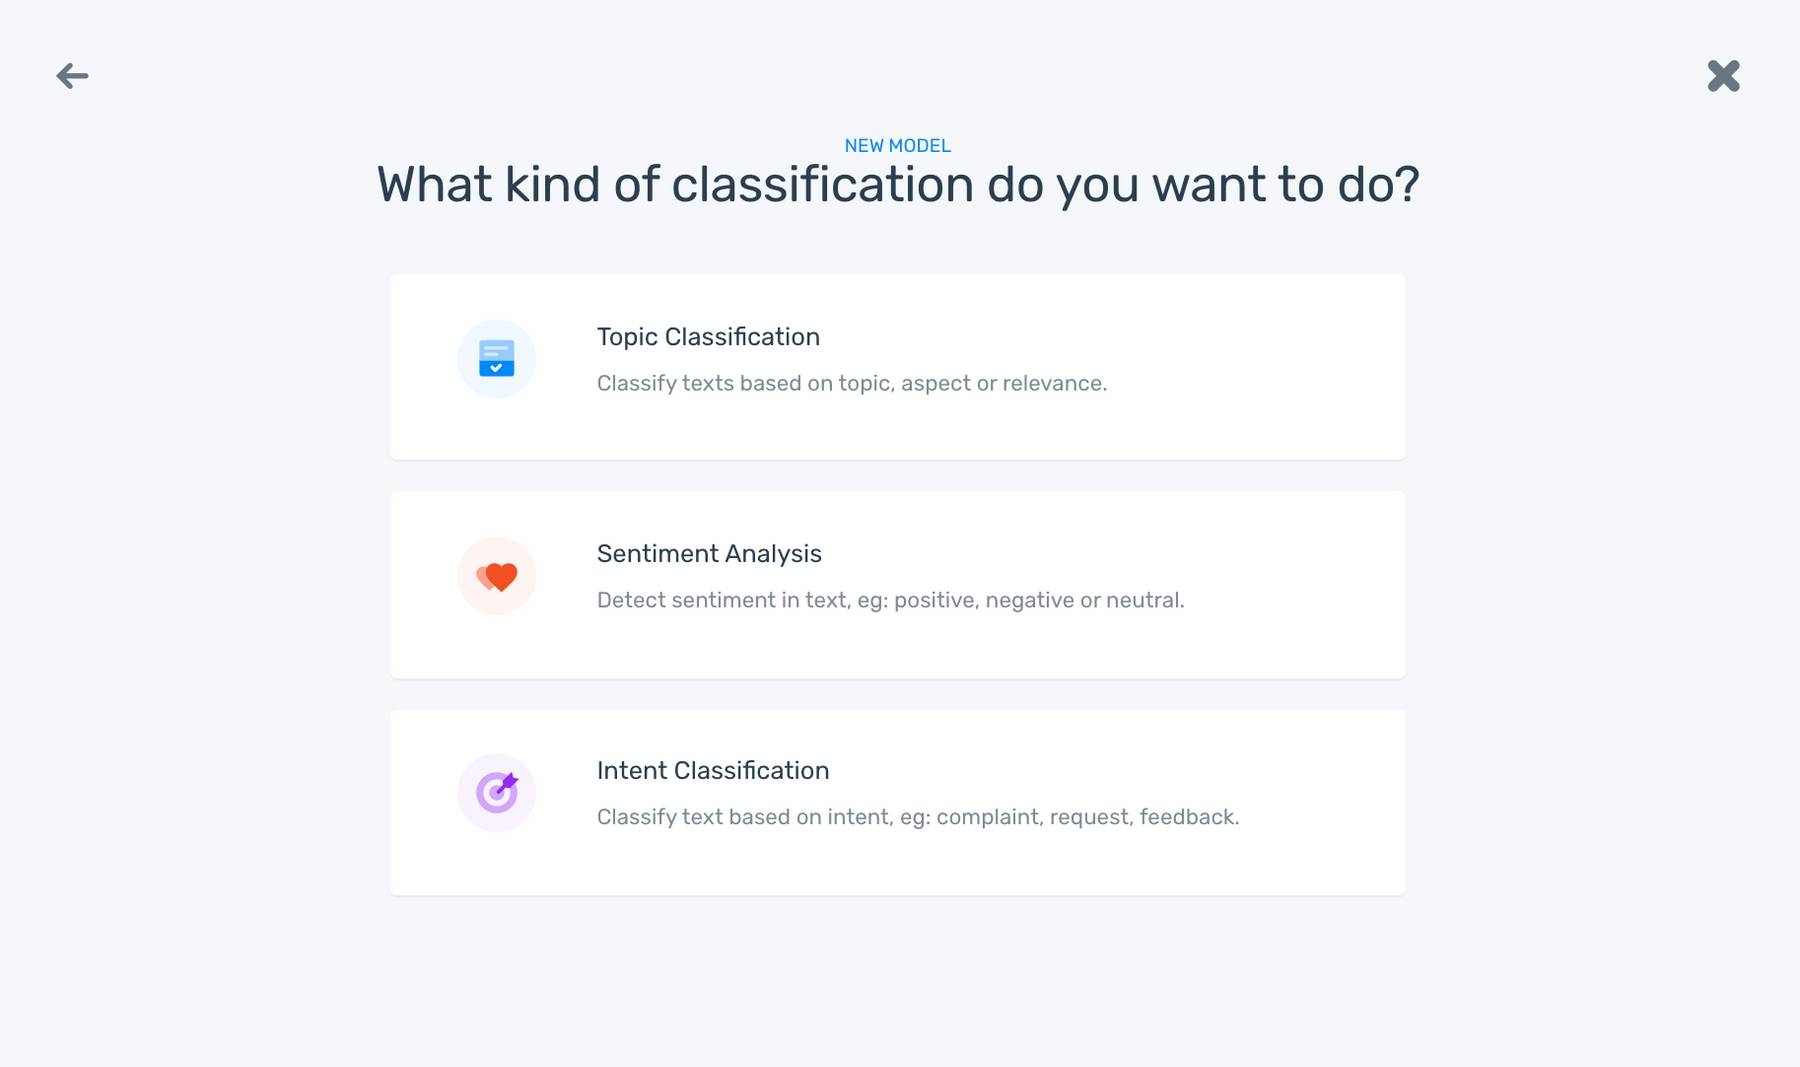 The option to choose from three classifiers: topic, sentiment and intent.